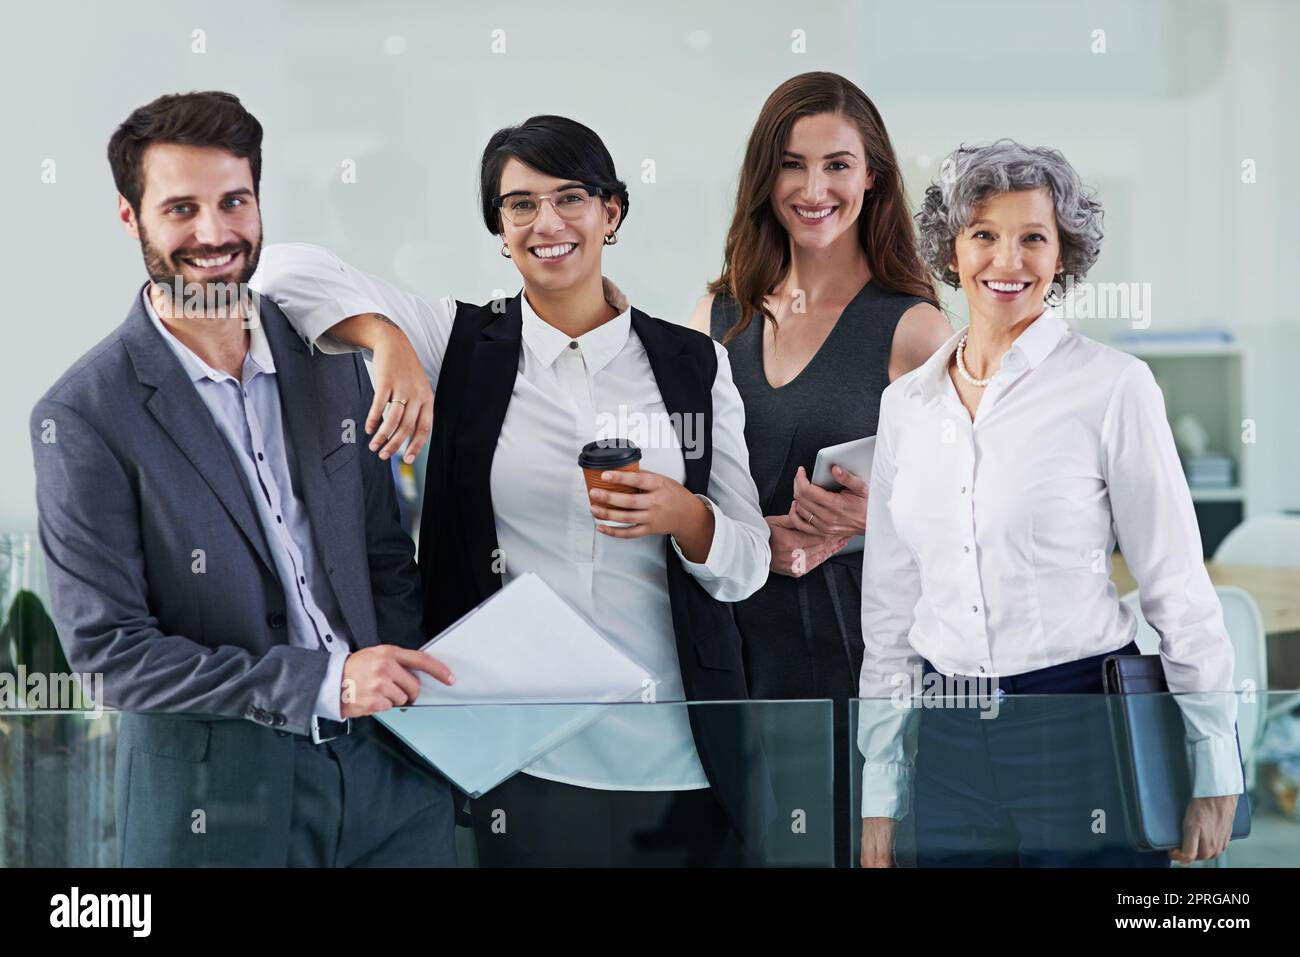 Were all about conquering challenges. Portrait of a group of businesspeople standing together in a modern office. Stock Photo